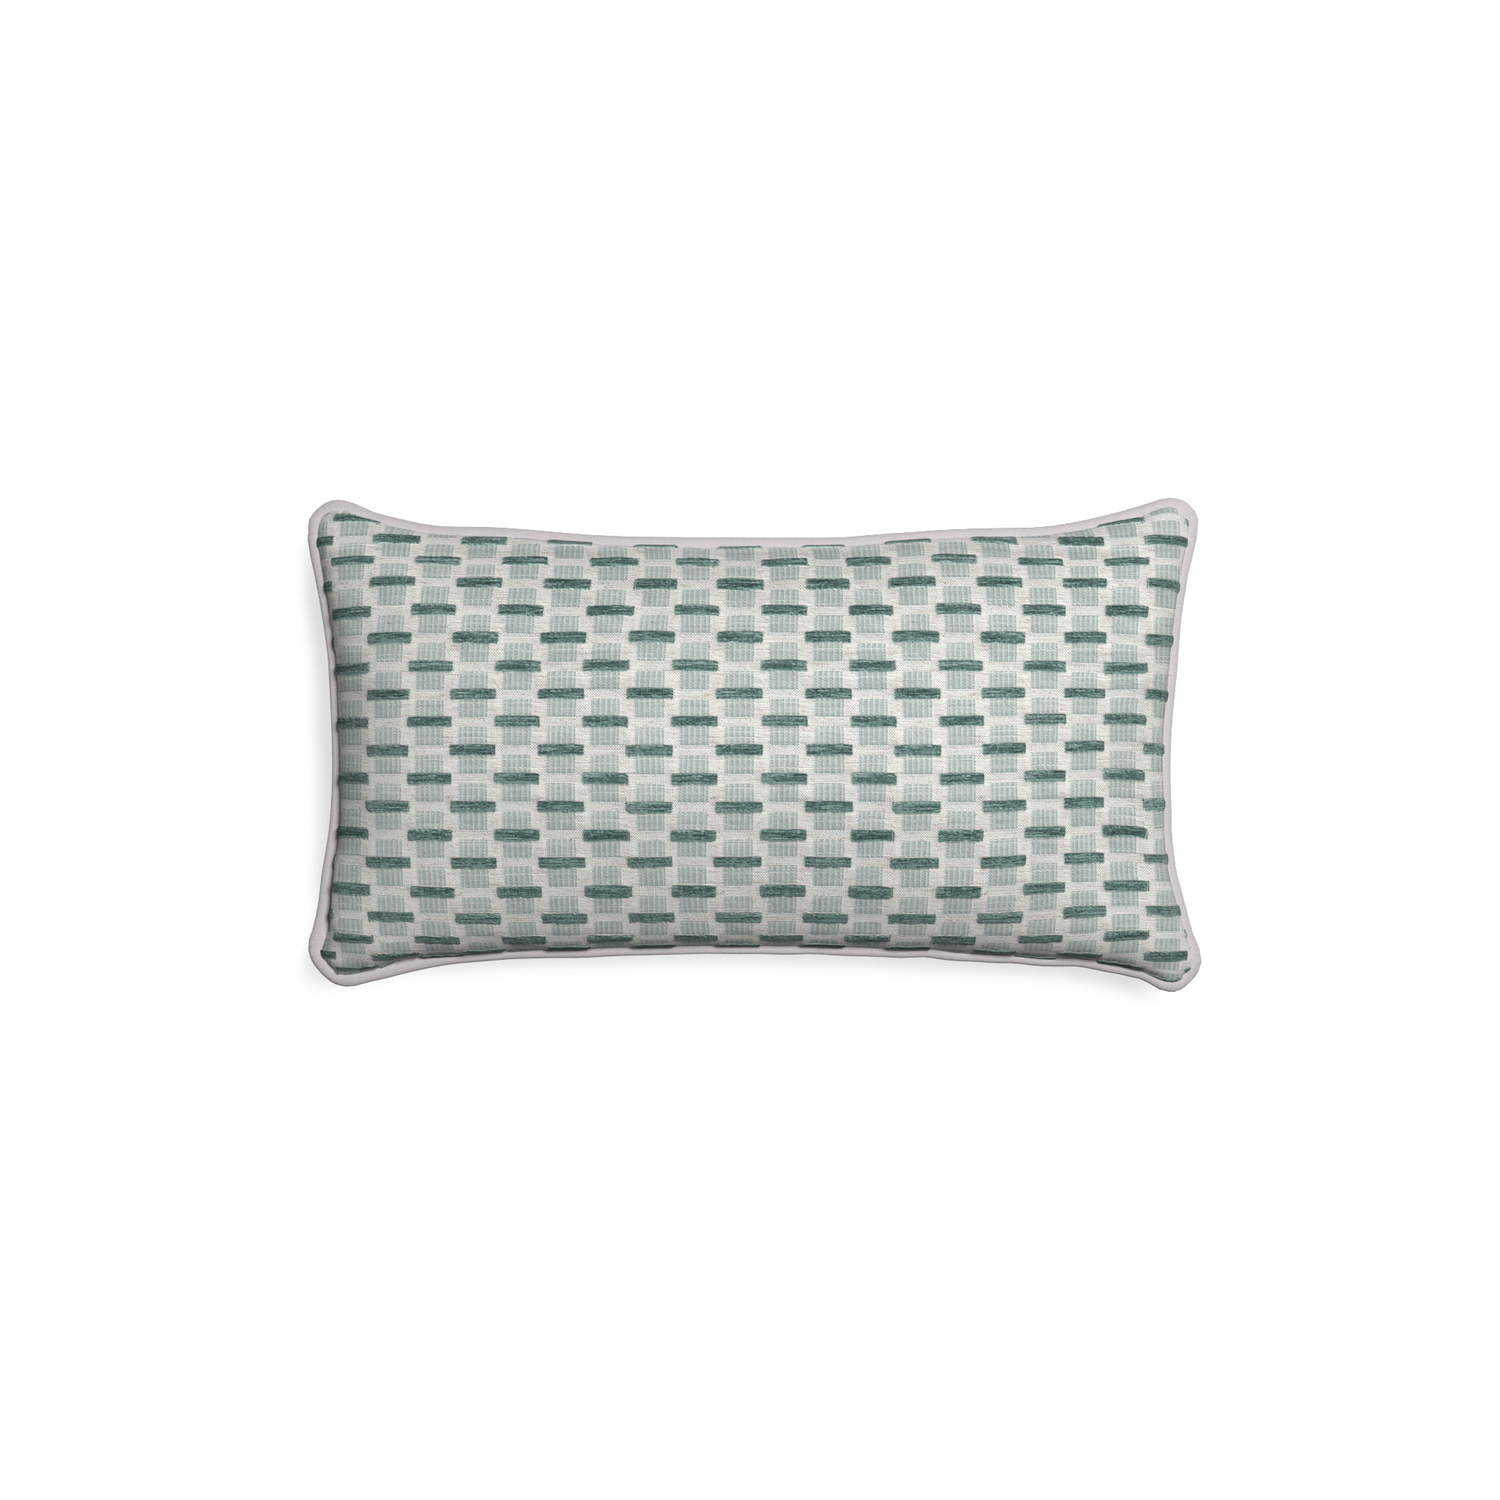 Petite-lumbar willow mint custom green geometric chenillepillow with pebble piping on white background